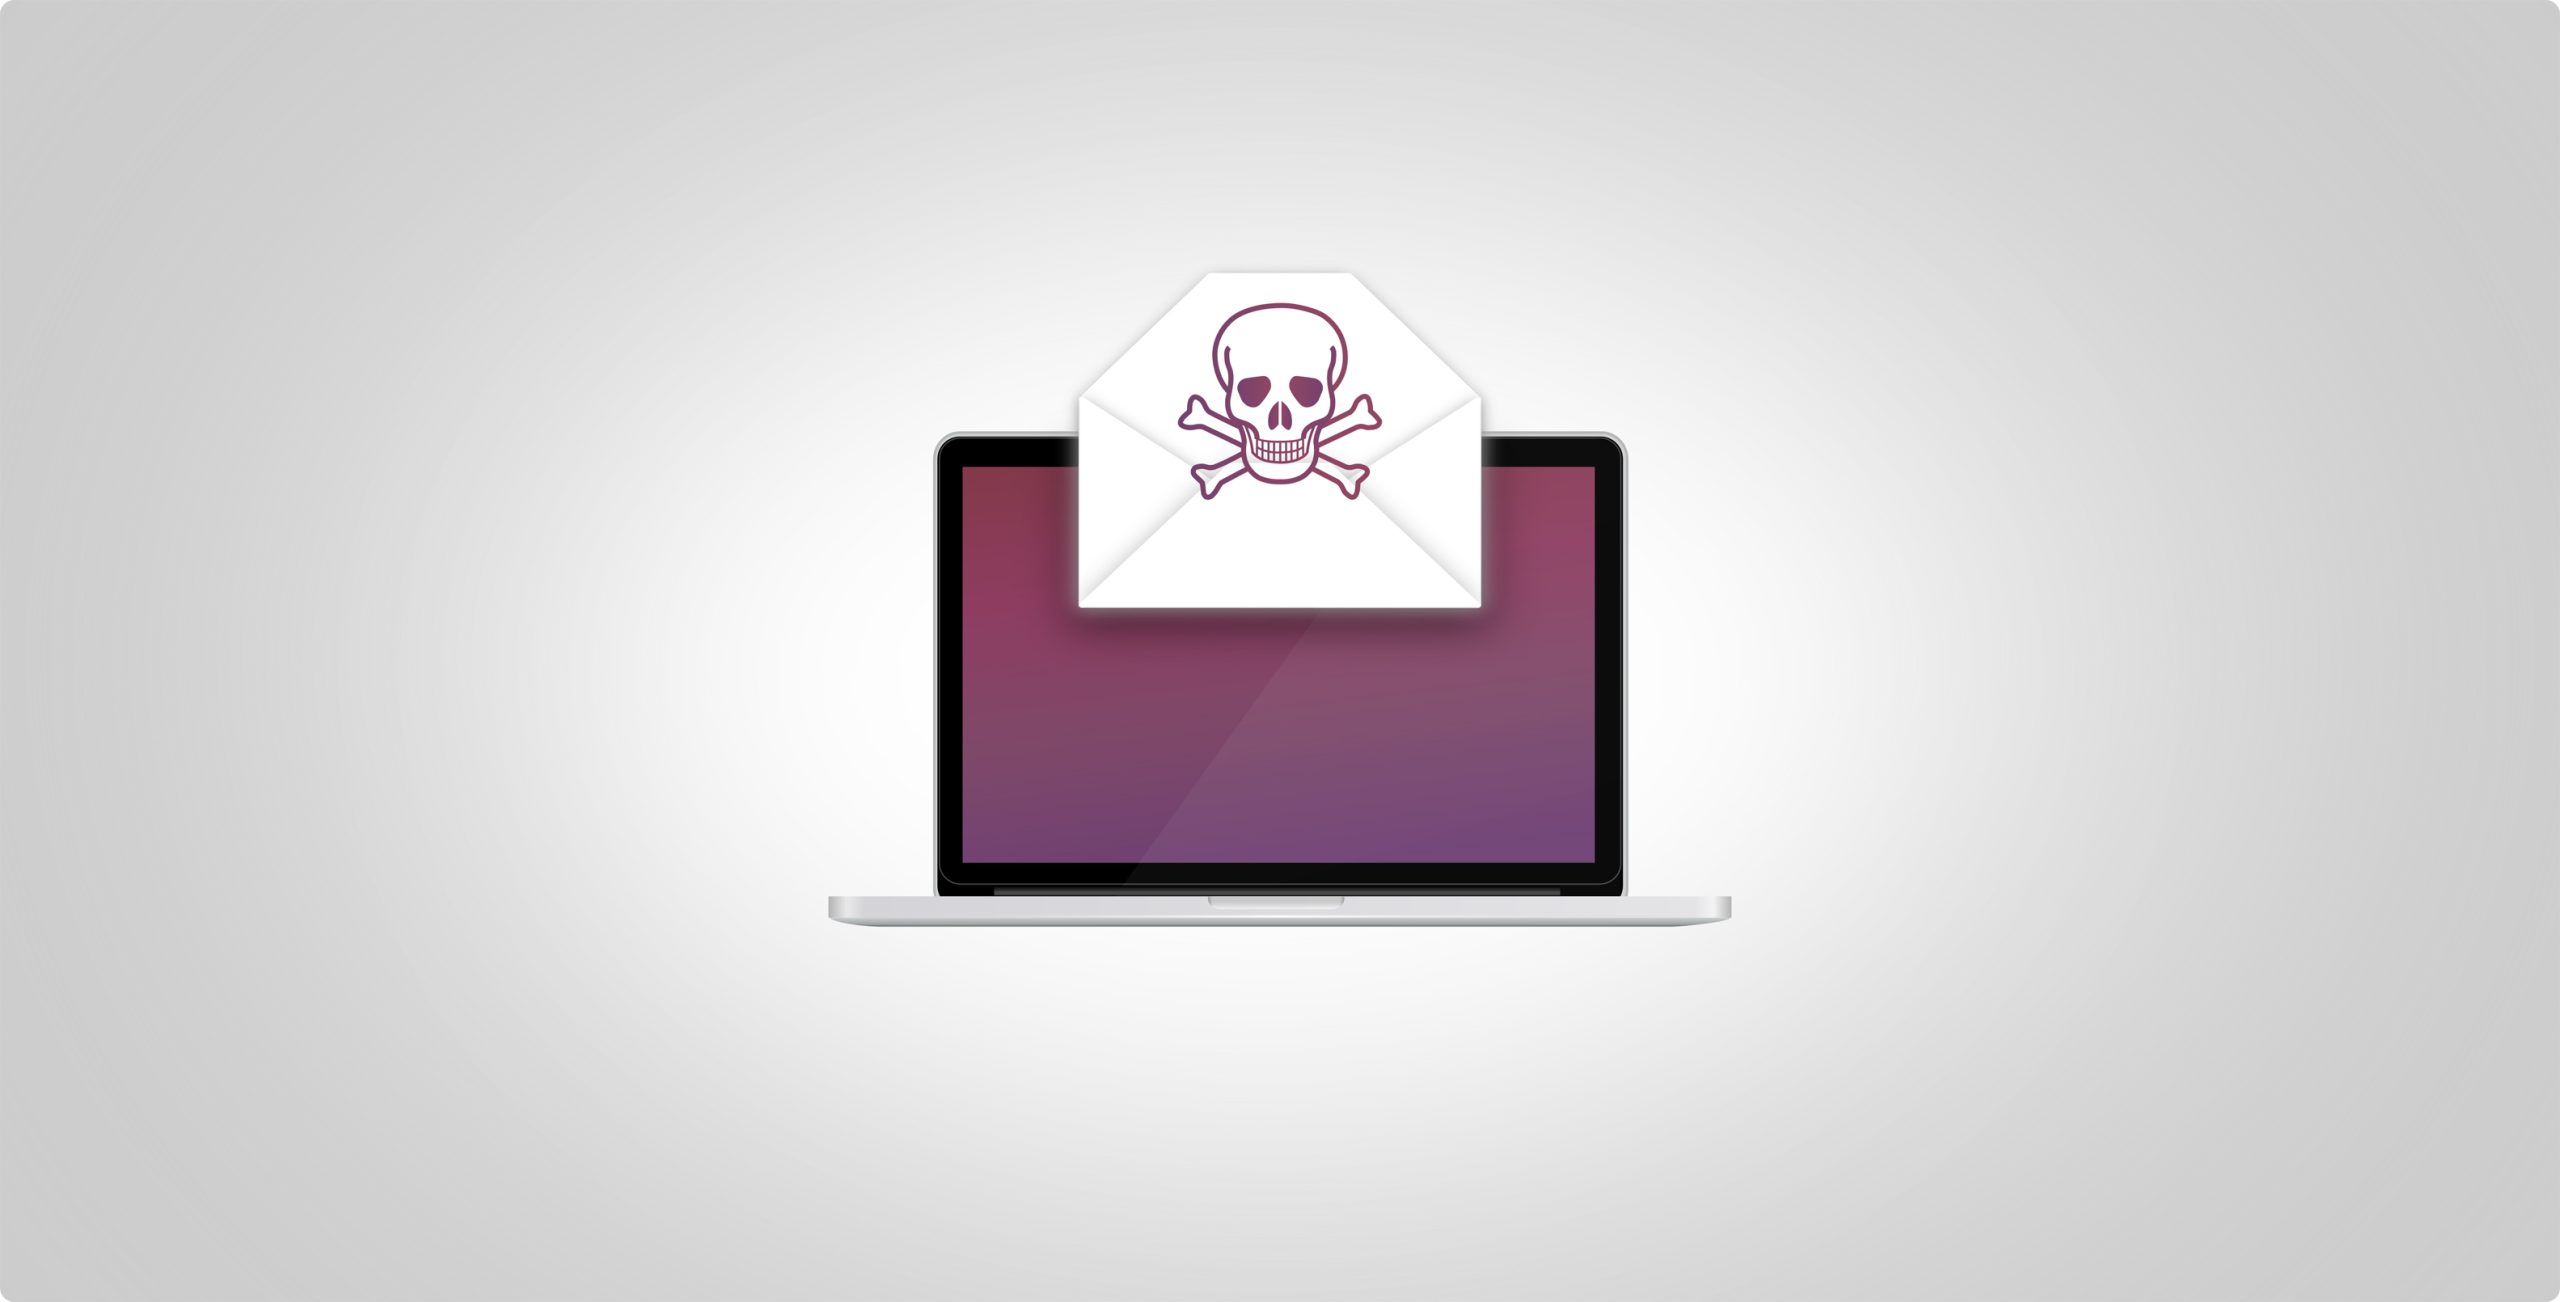 Laptop shown opening email with a skull and crossbones on it